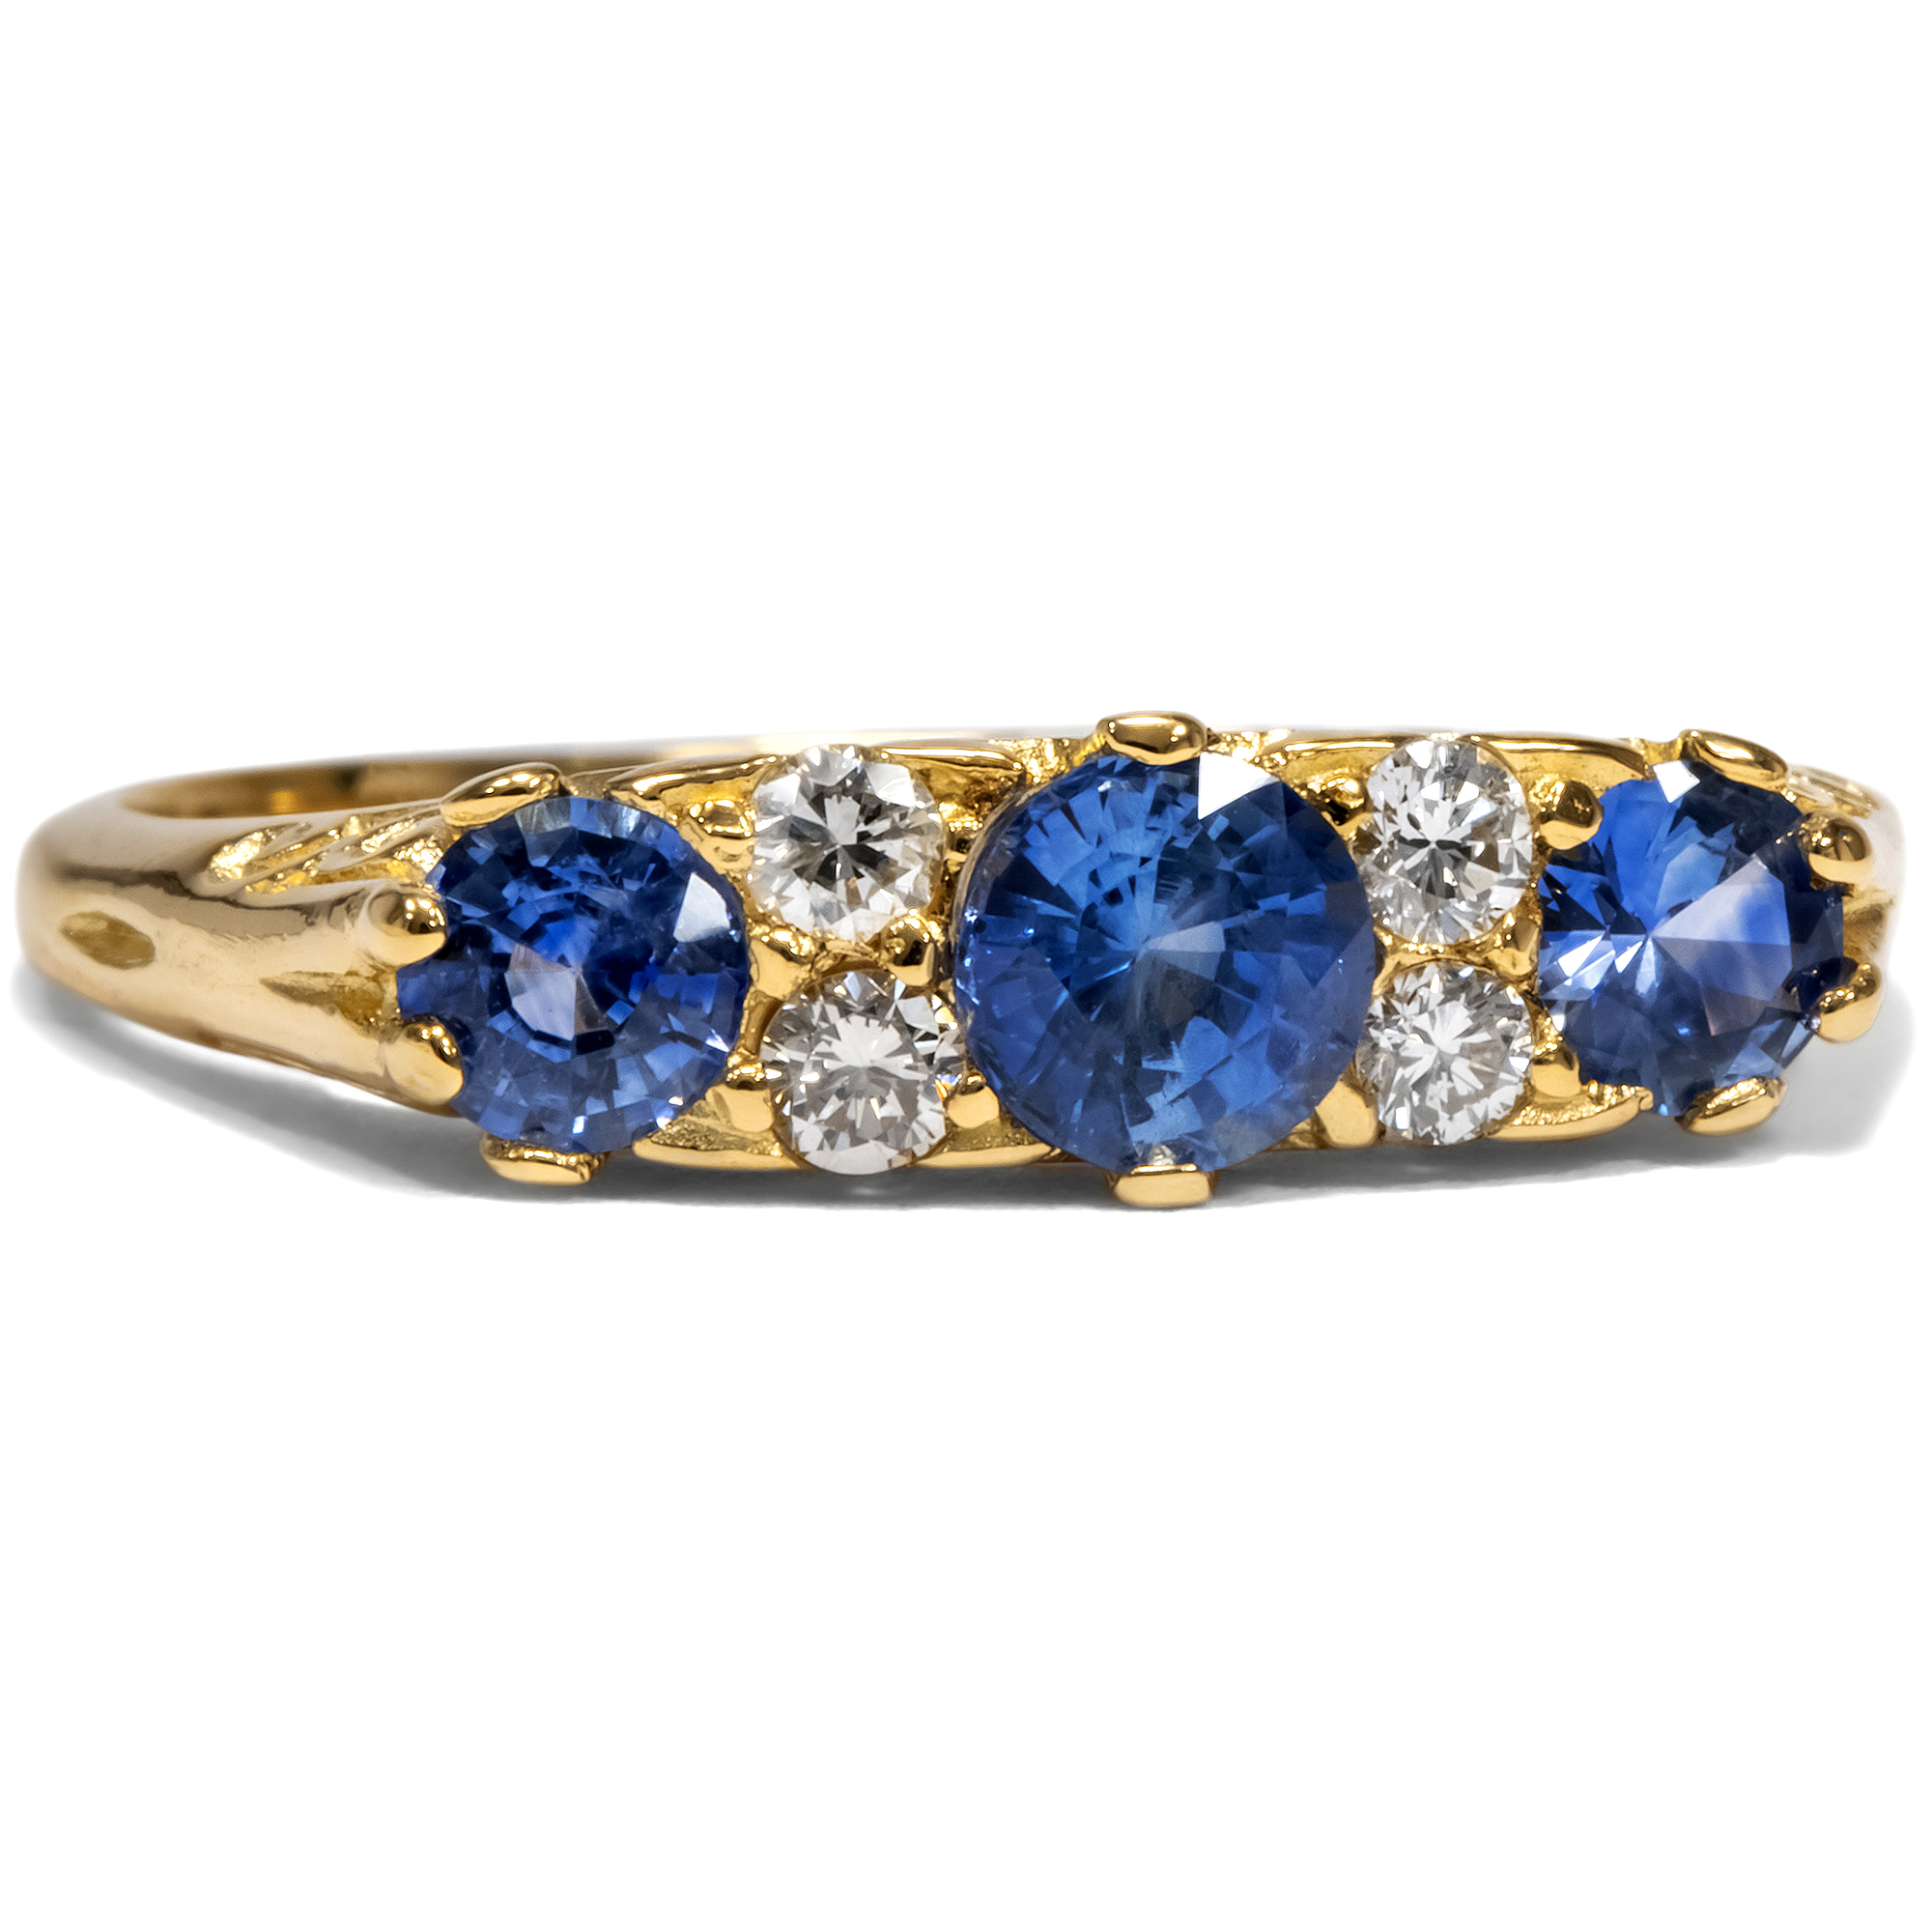 Victorian-Style Gold Ring with Sapphires & Diamonds, from Our Workshop